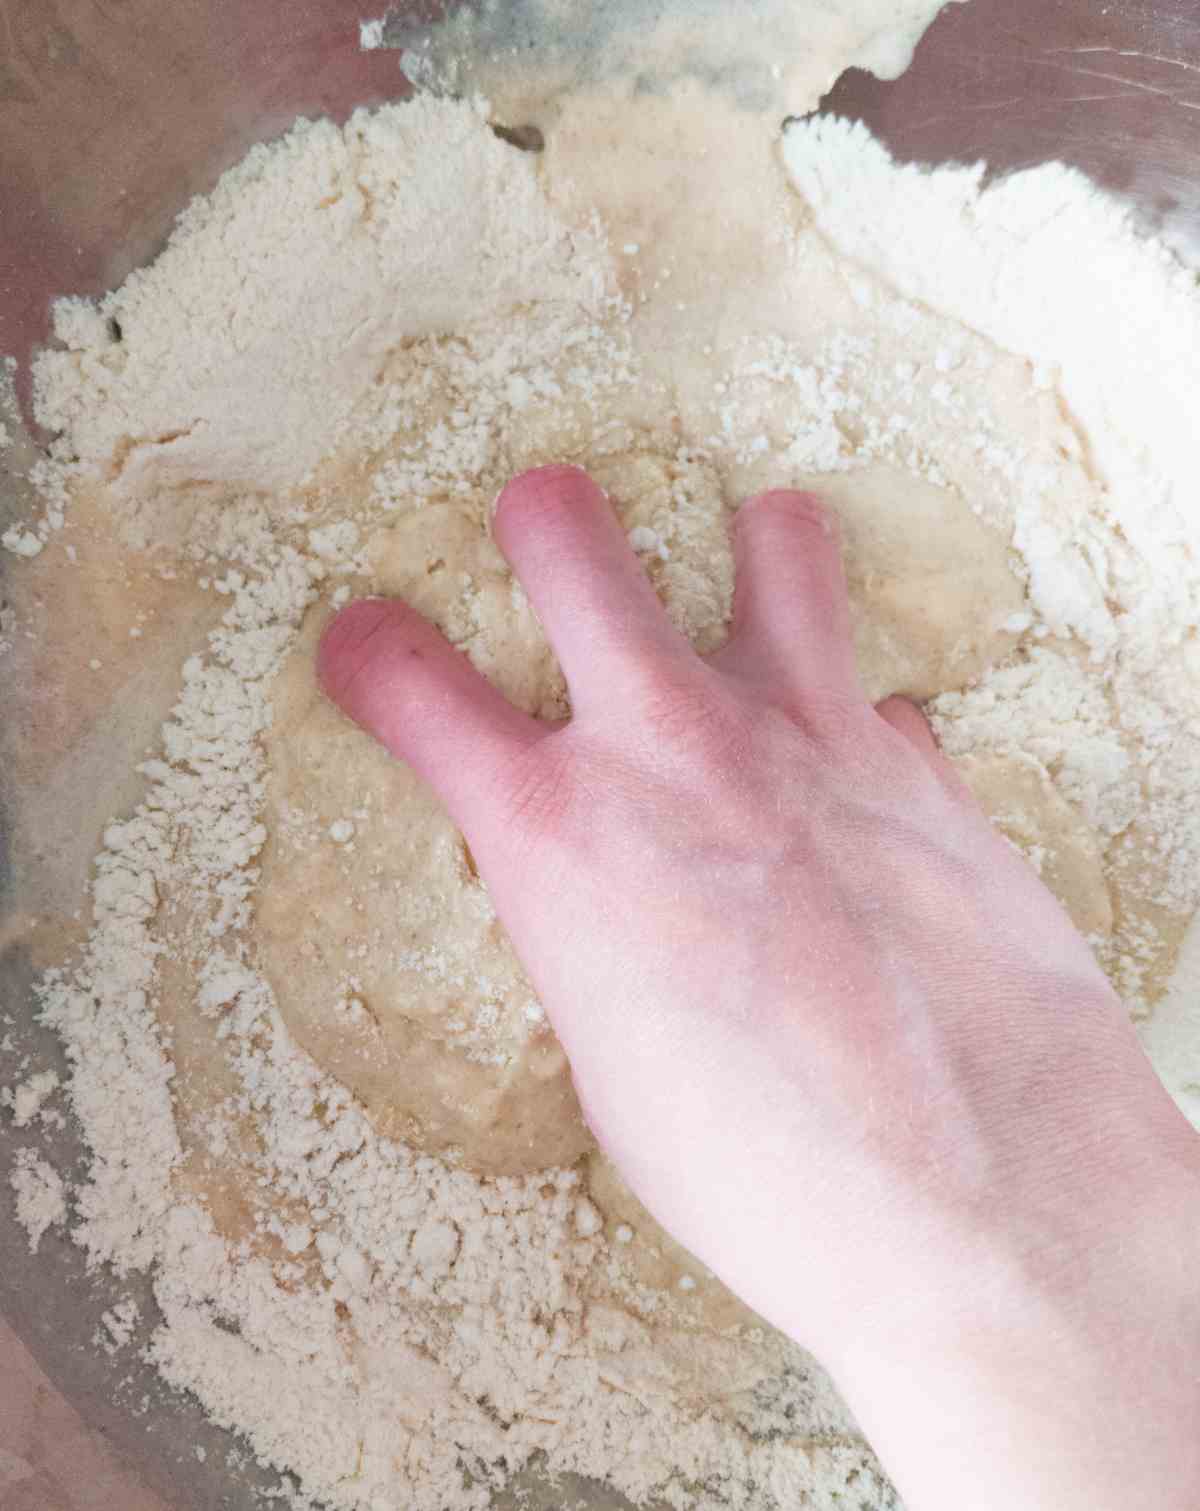 Mixing the dough by hand in a large mixing bowl.